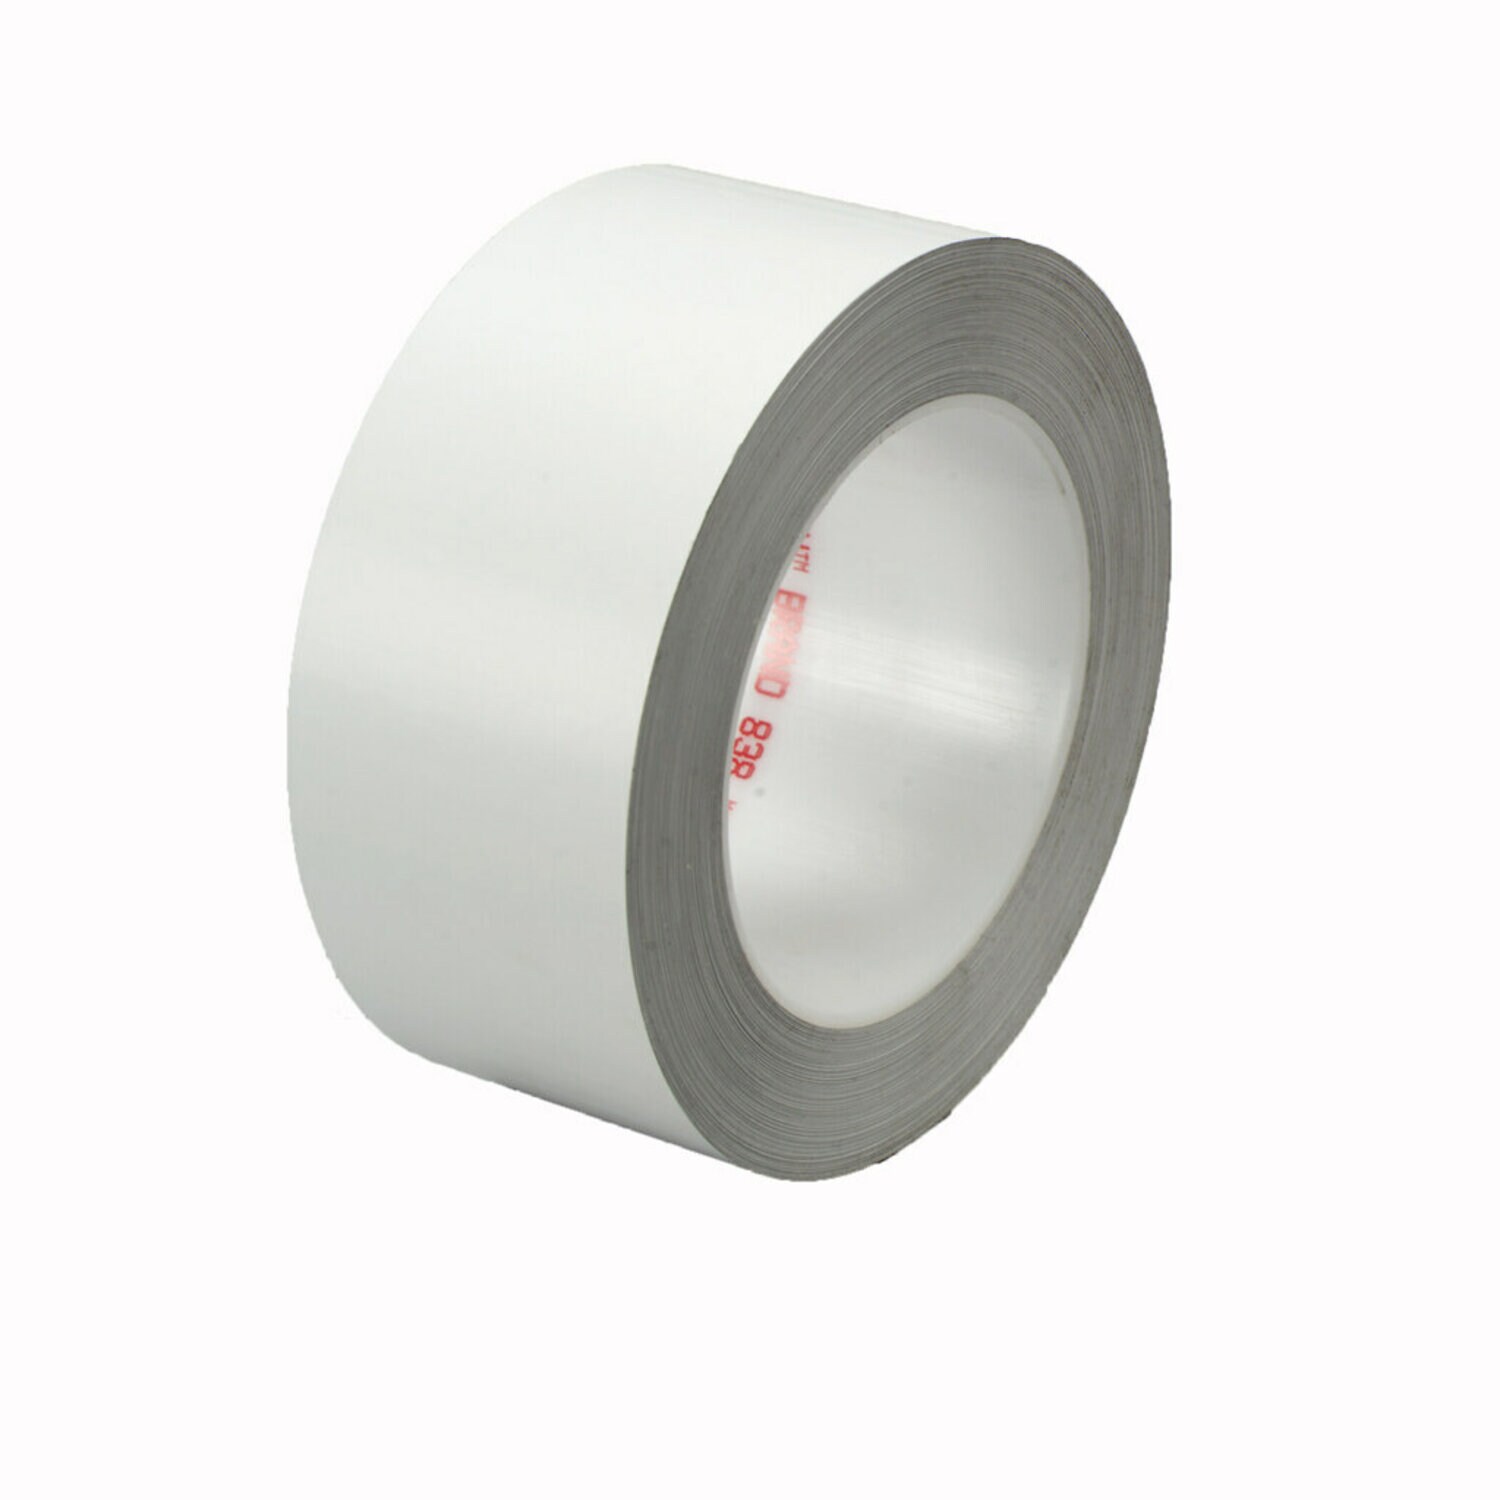 7000123293 - 3M Weather Resistant Film Tape 838, White, 2 in x 72 yd, 3.4 mil, 24
rolls per case